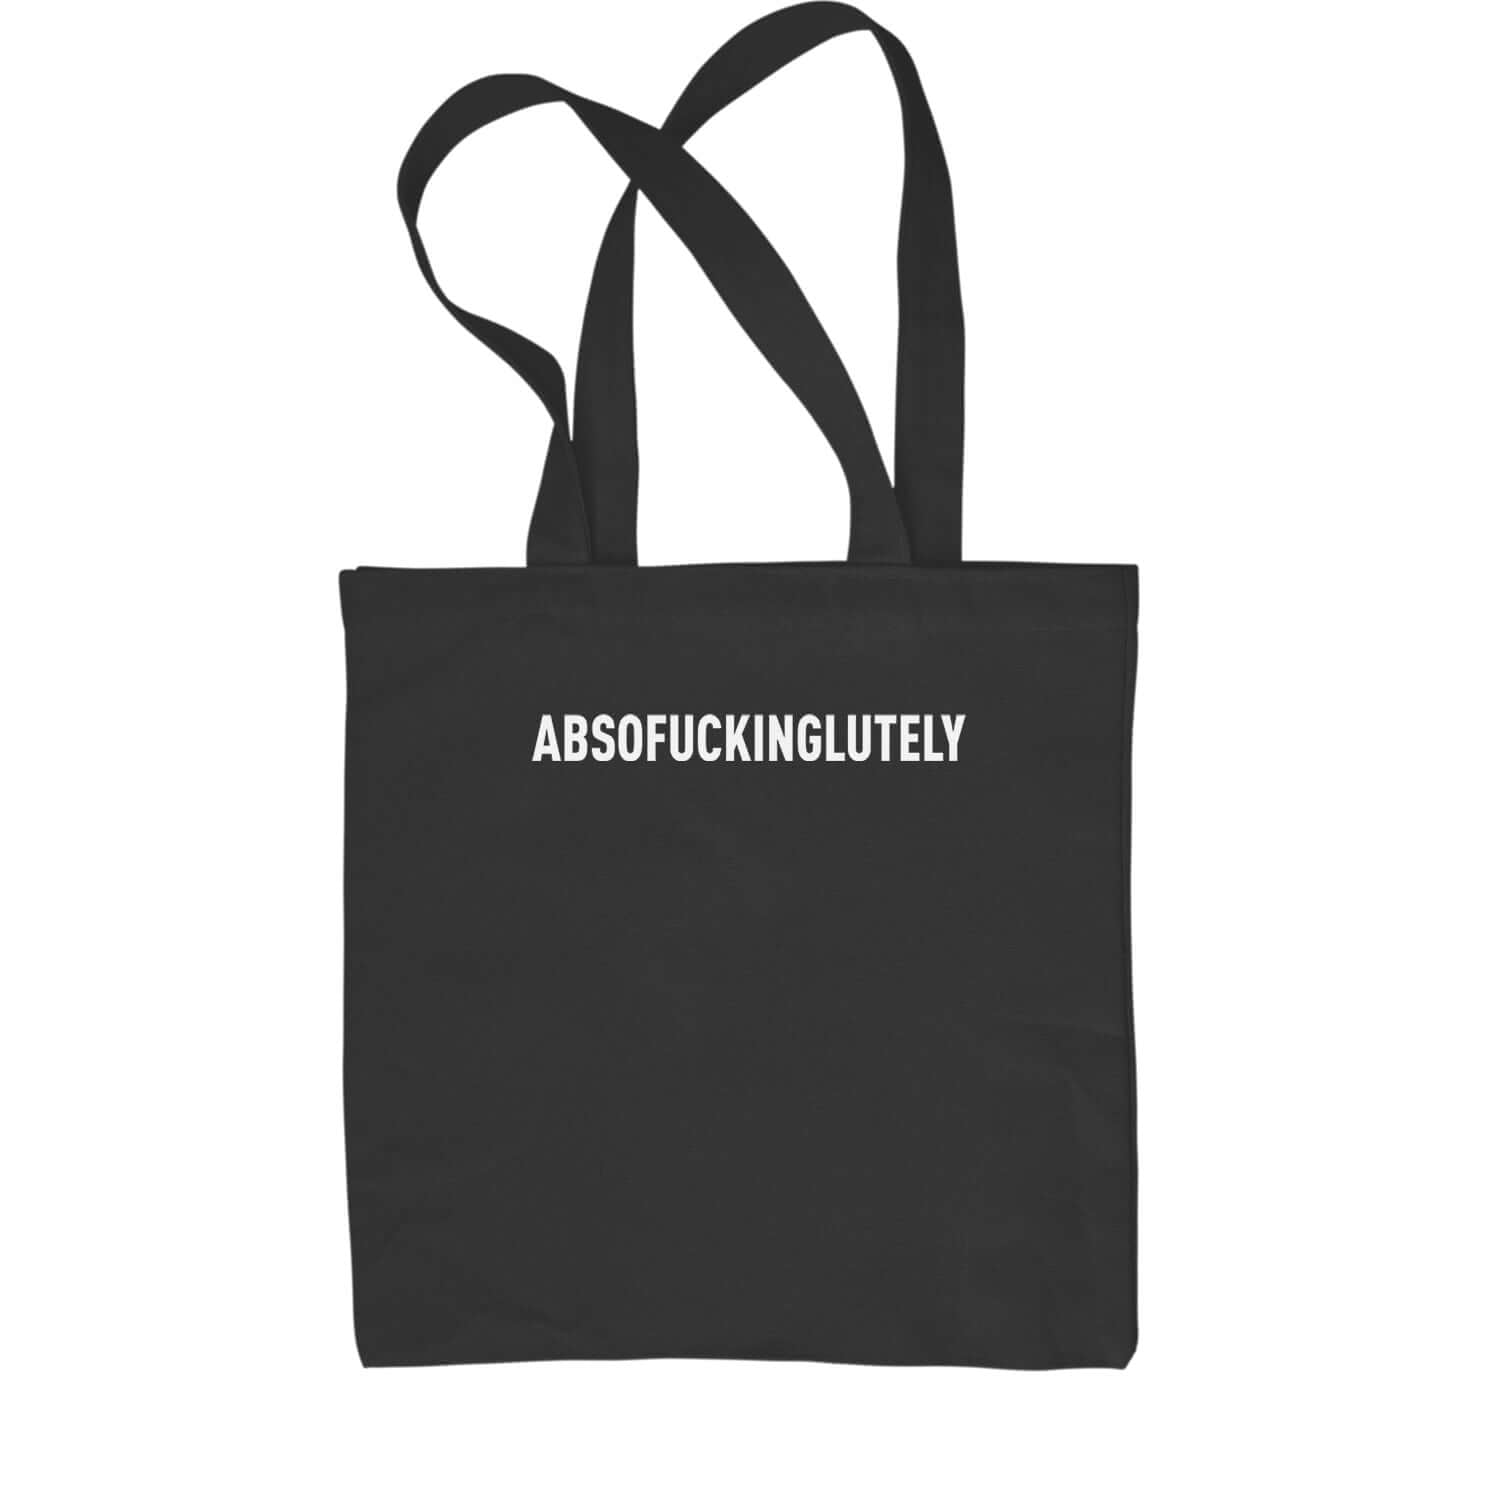 Abso f-cking lutely Shopping Tote Bag funny, shirt by Expression Tees